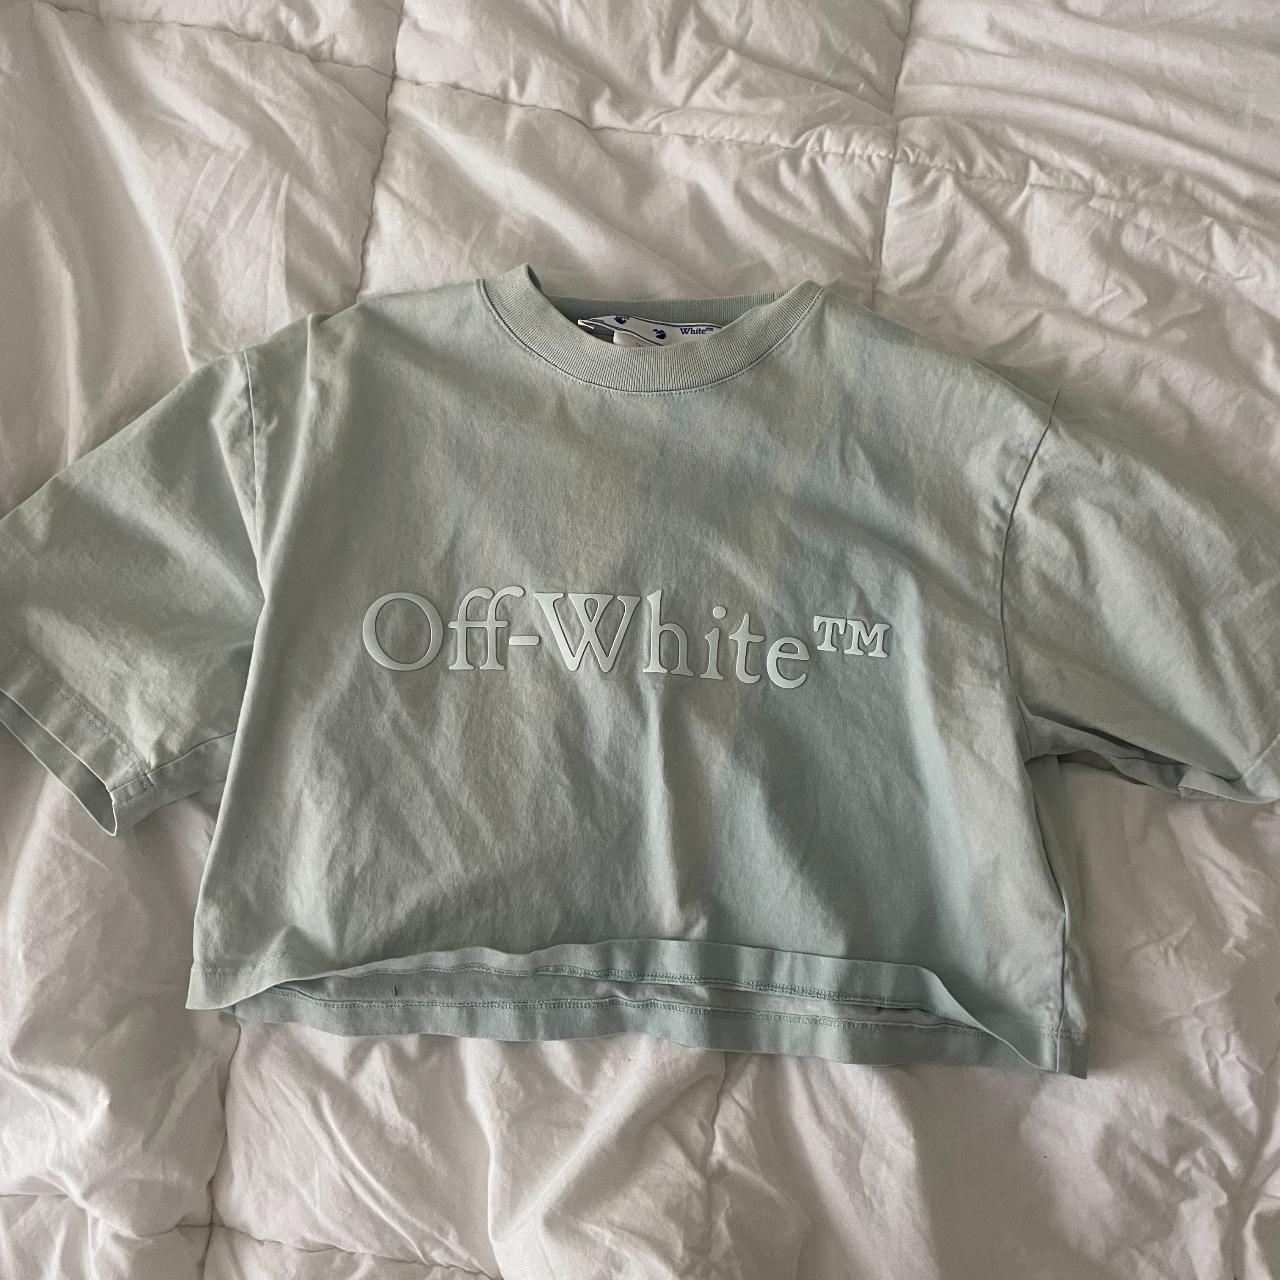 AUTHENTIC womens off-white crop top size... - Depop